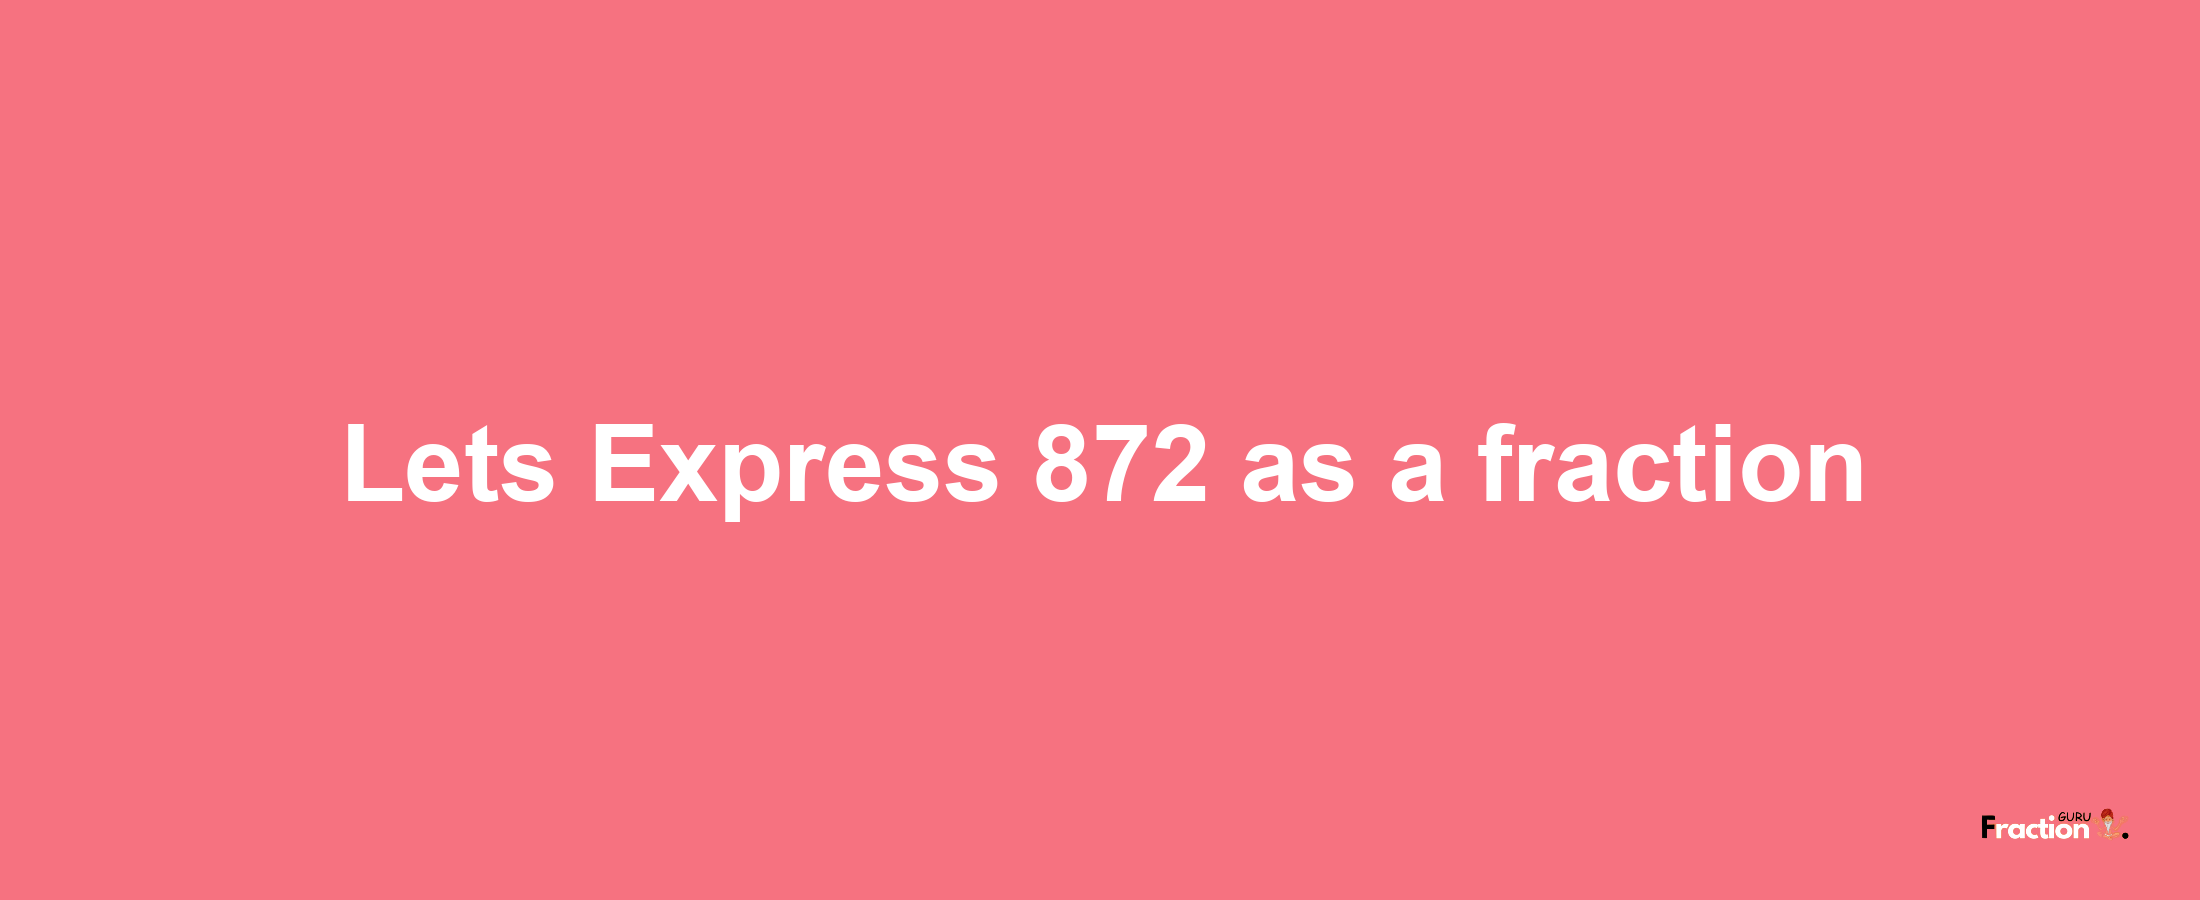 Lets Express 872 as afraction